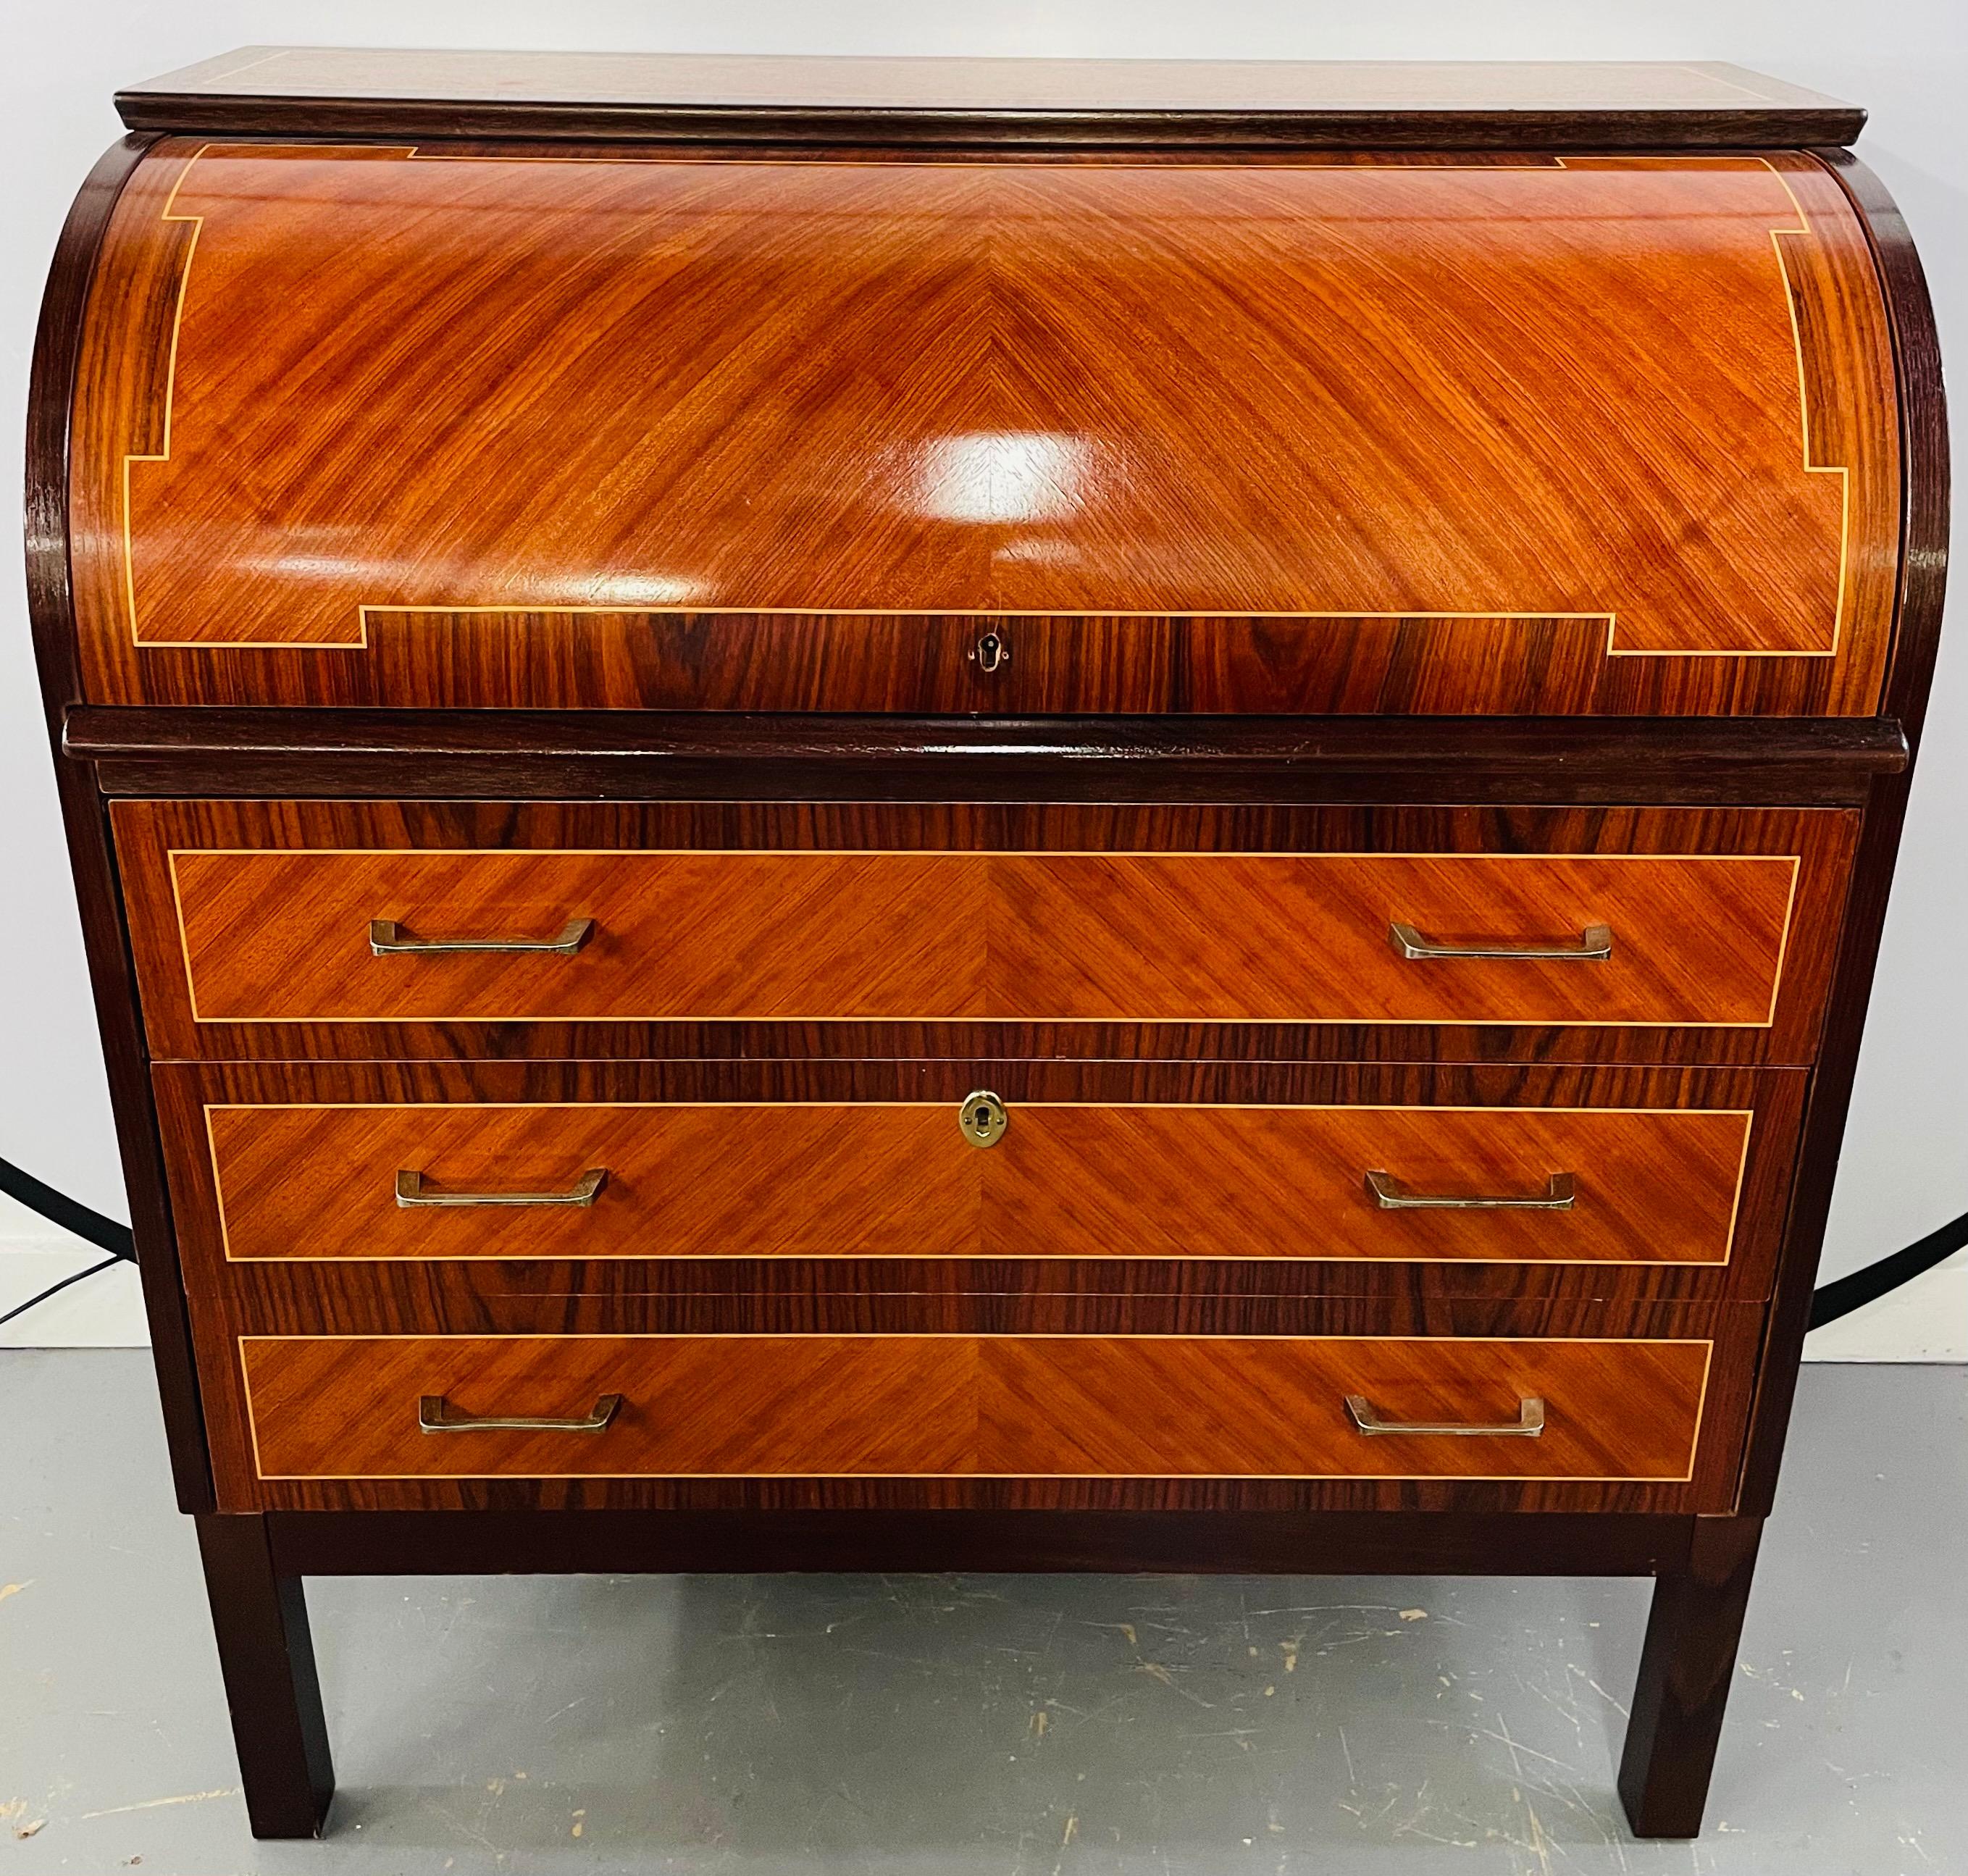 An Edwardian Sheraton revival style flame mahogany cylinder desk or commode. The cylinder opening reveals fitted interior with three small drawers having marquetry inlaid floral decoration. The desk / commode features three drawers seating on